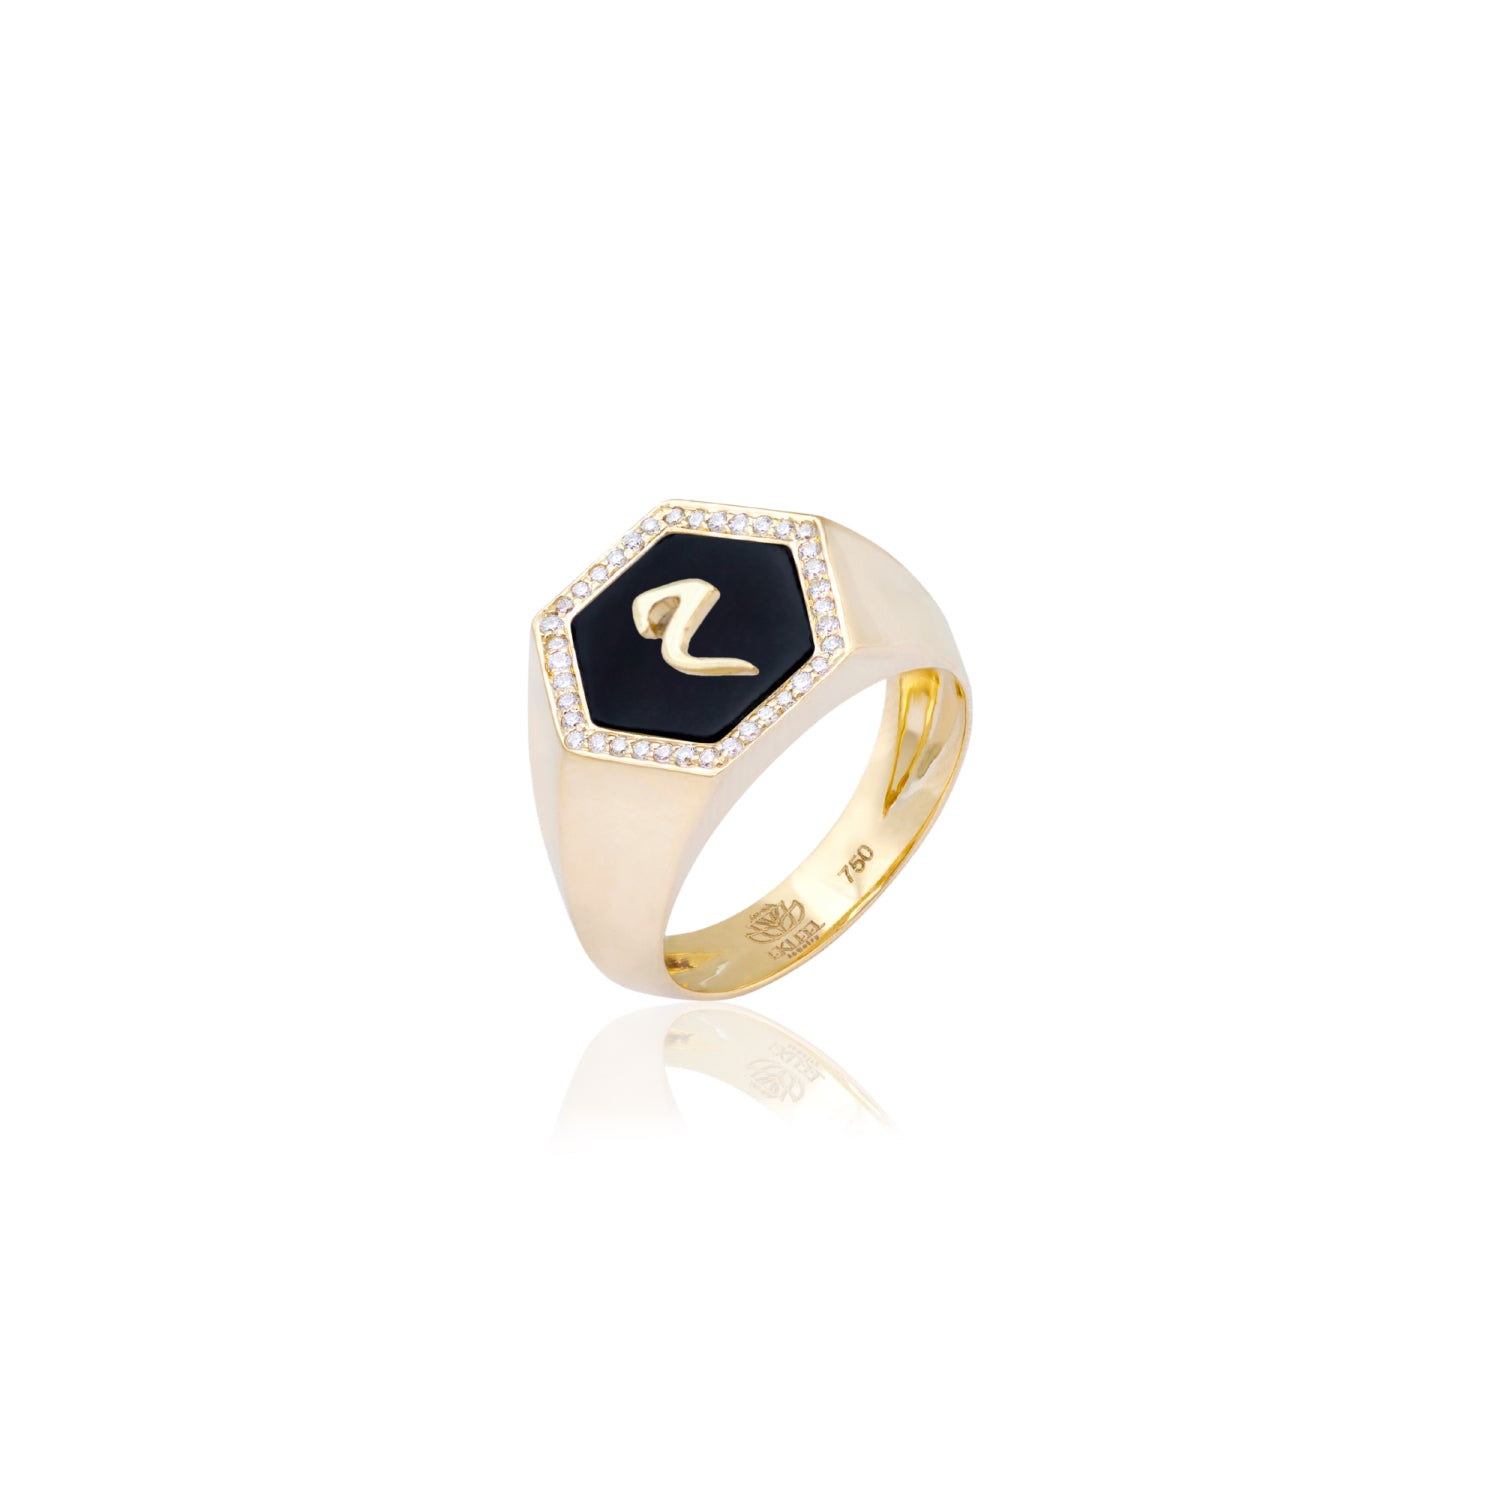 Qamoos 2.0 Letter م Onyx and Diamond Signet Ring in Yellow Gold